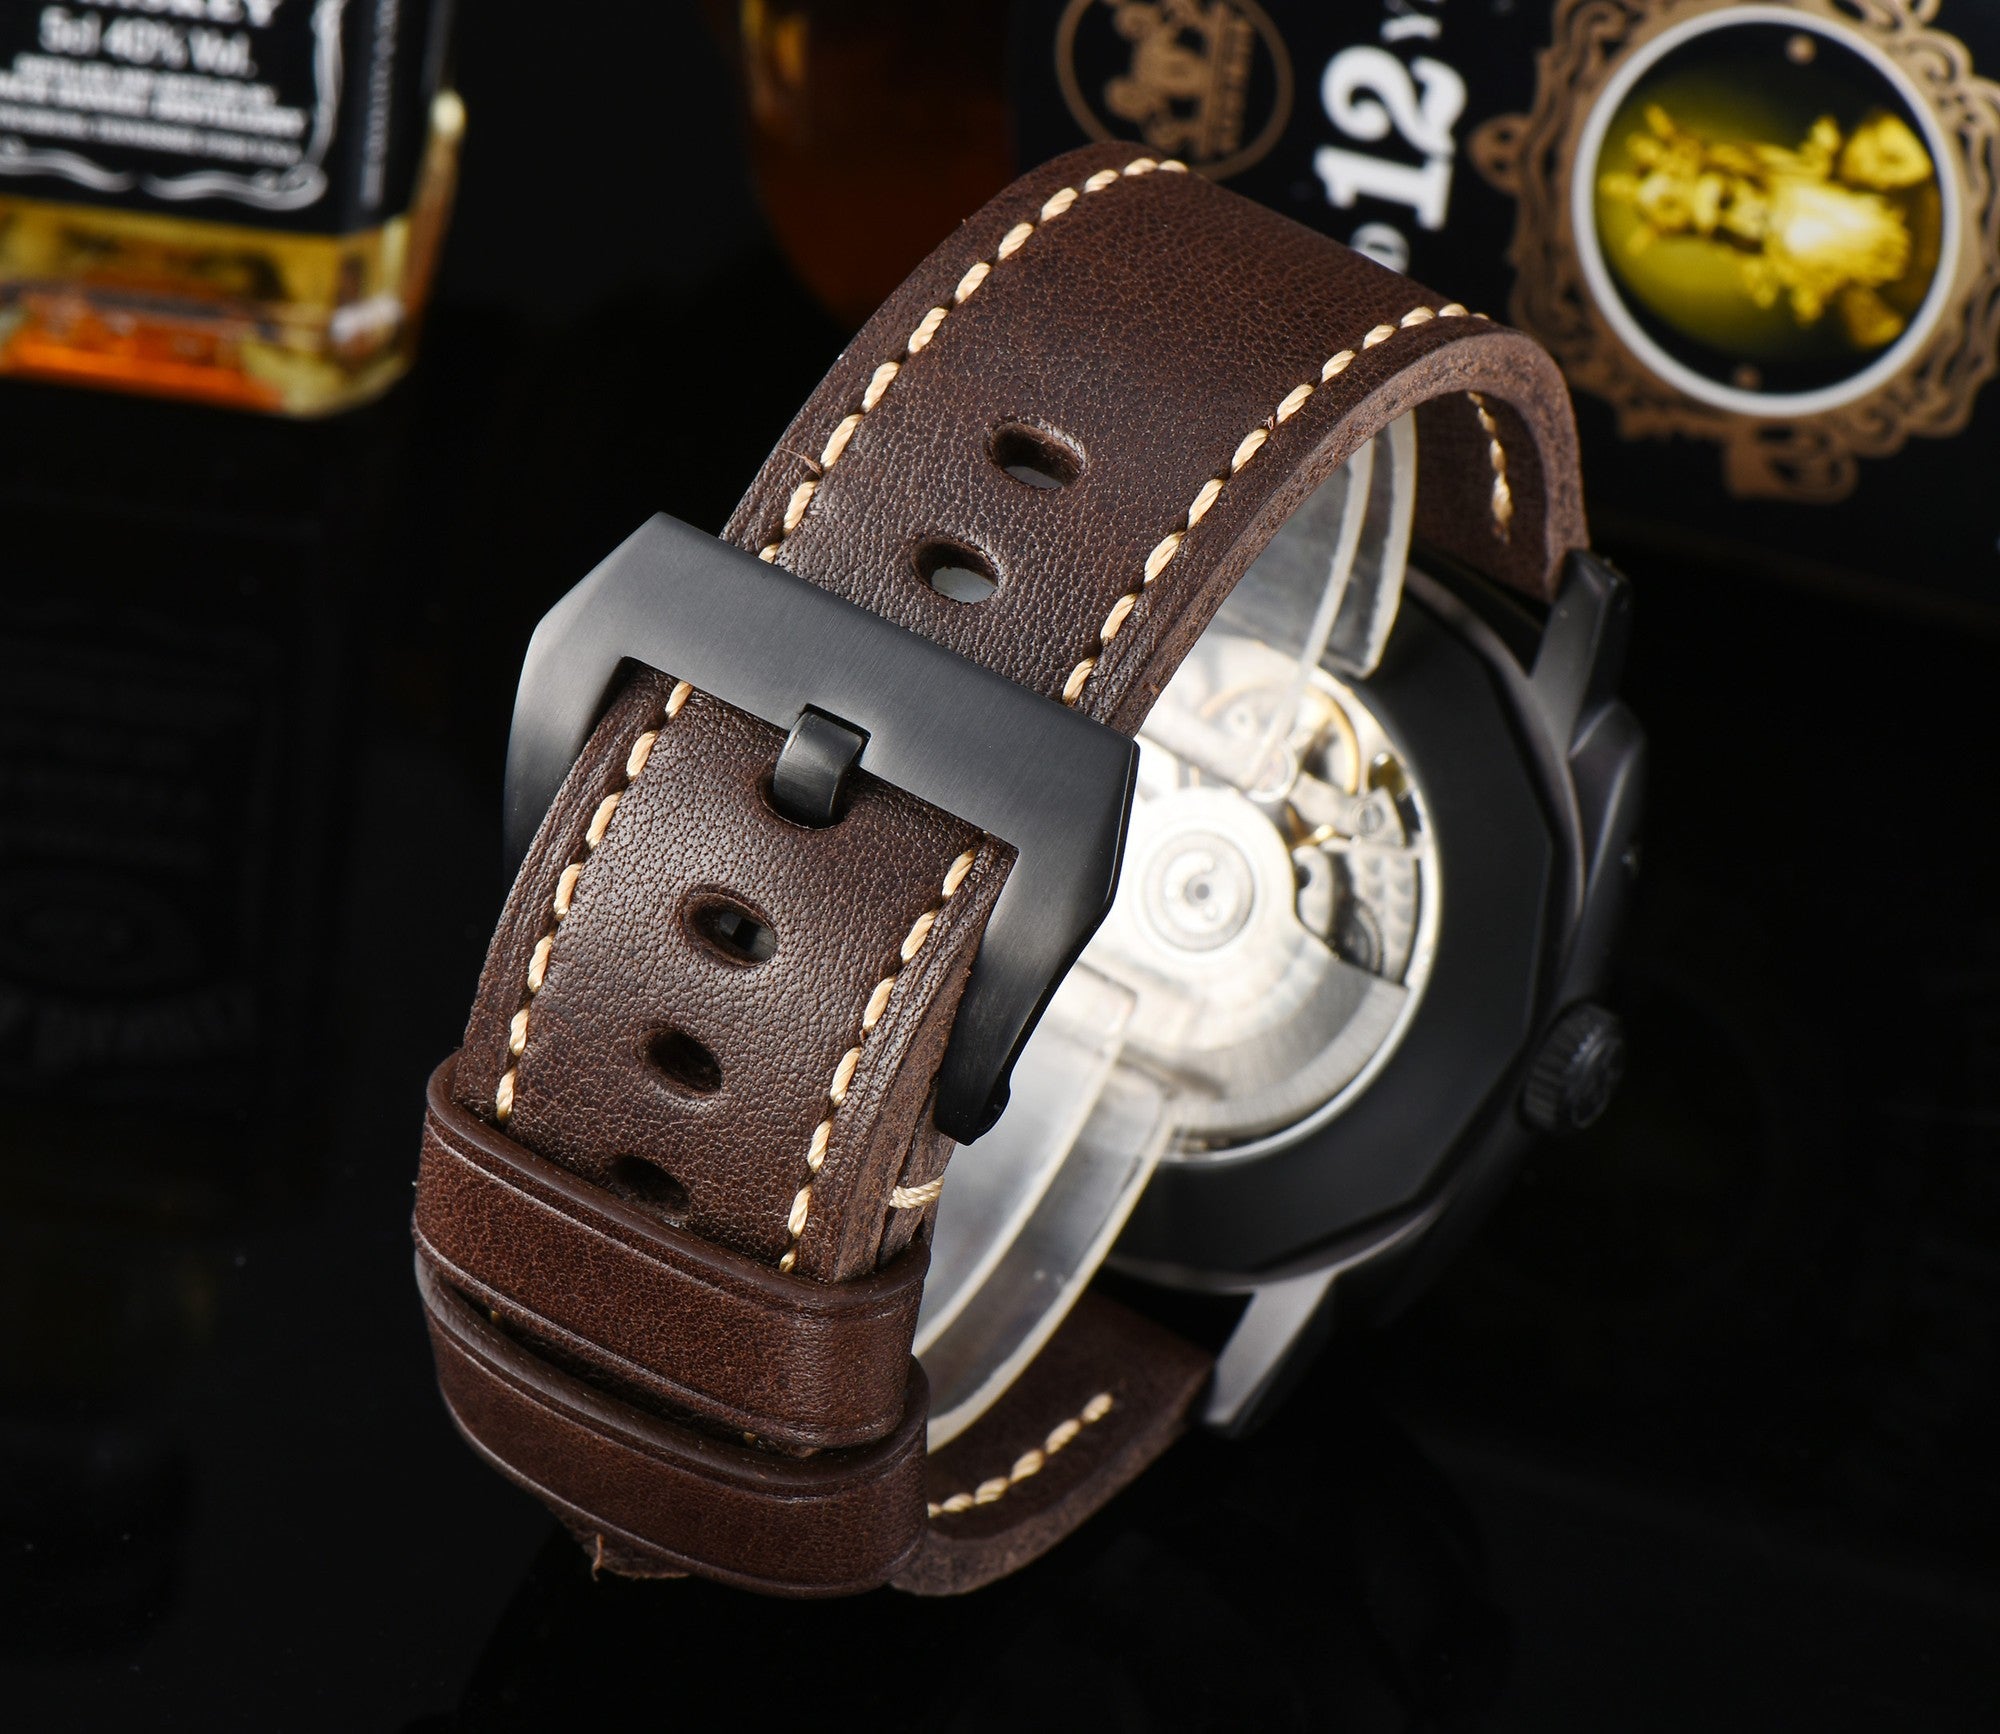 Parnis Military 47mm Self-winding Watch Men's Leather Belt / Suit Popular Luxury Brand / Waterproof / Recommended P45